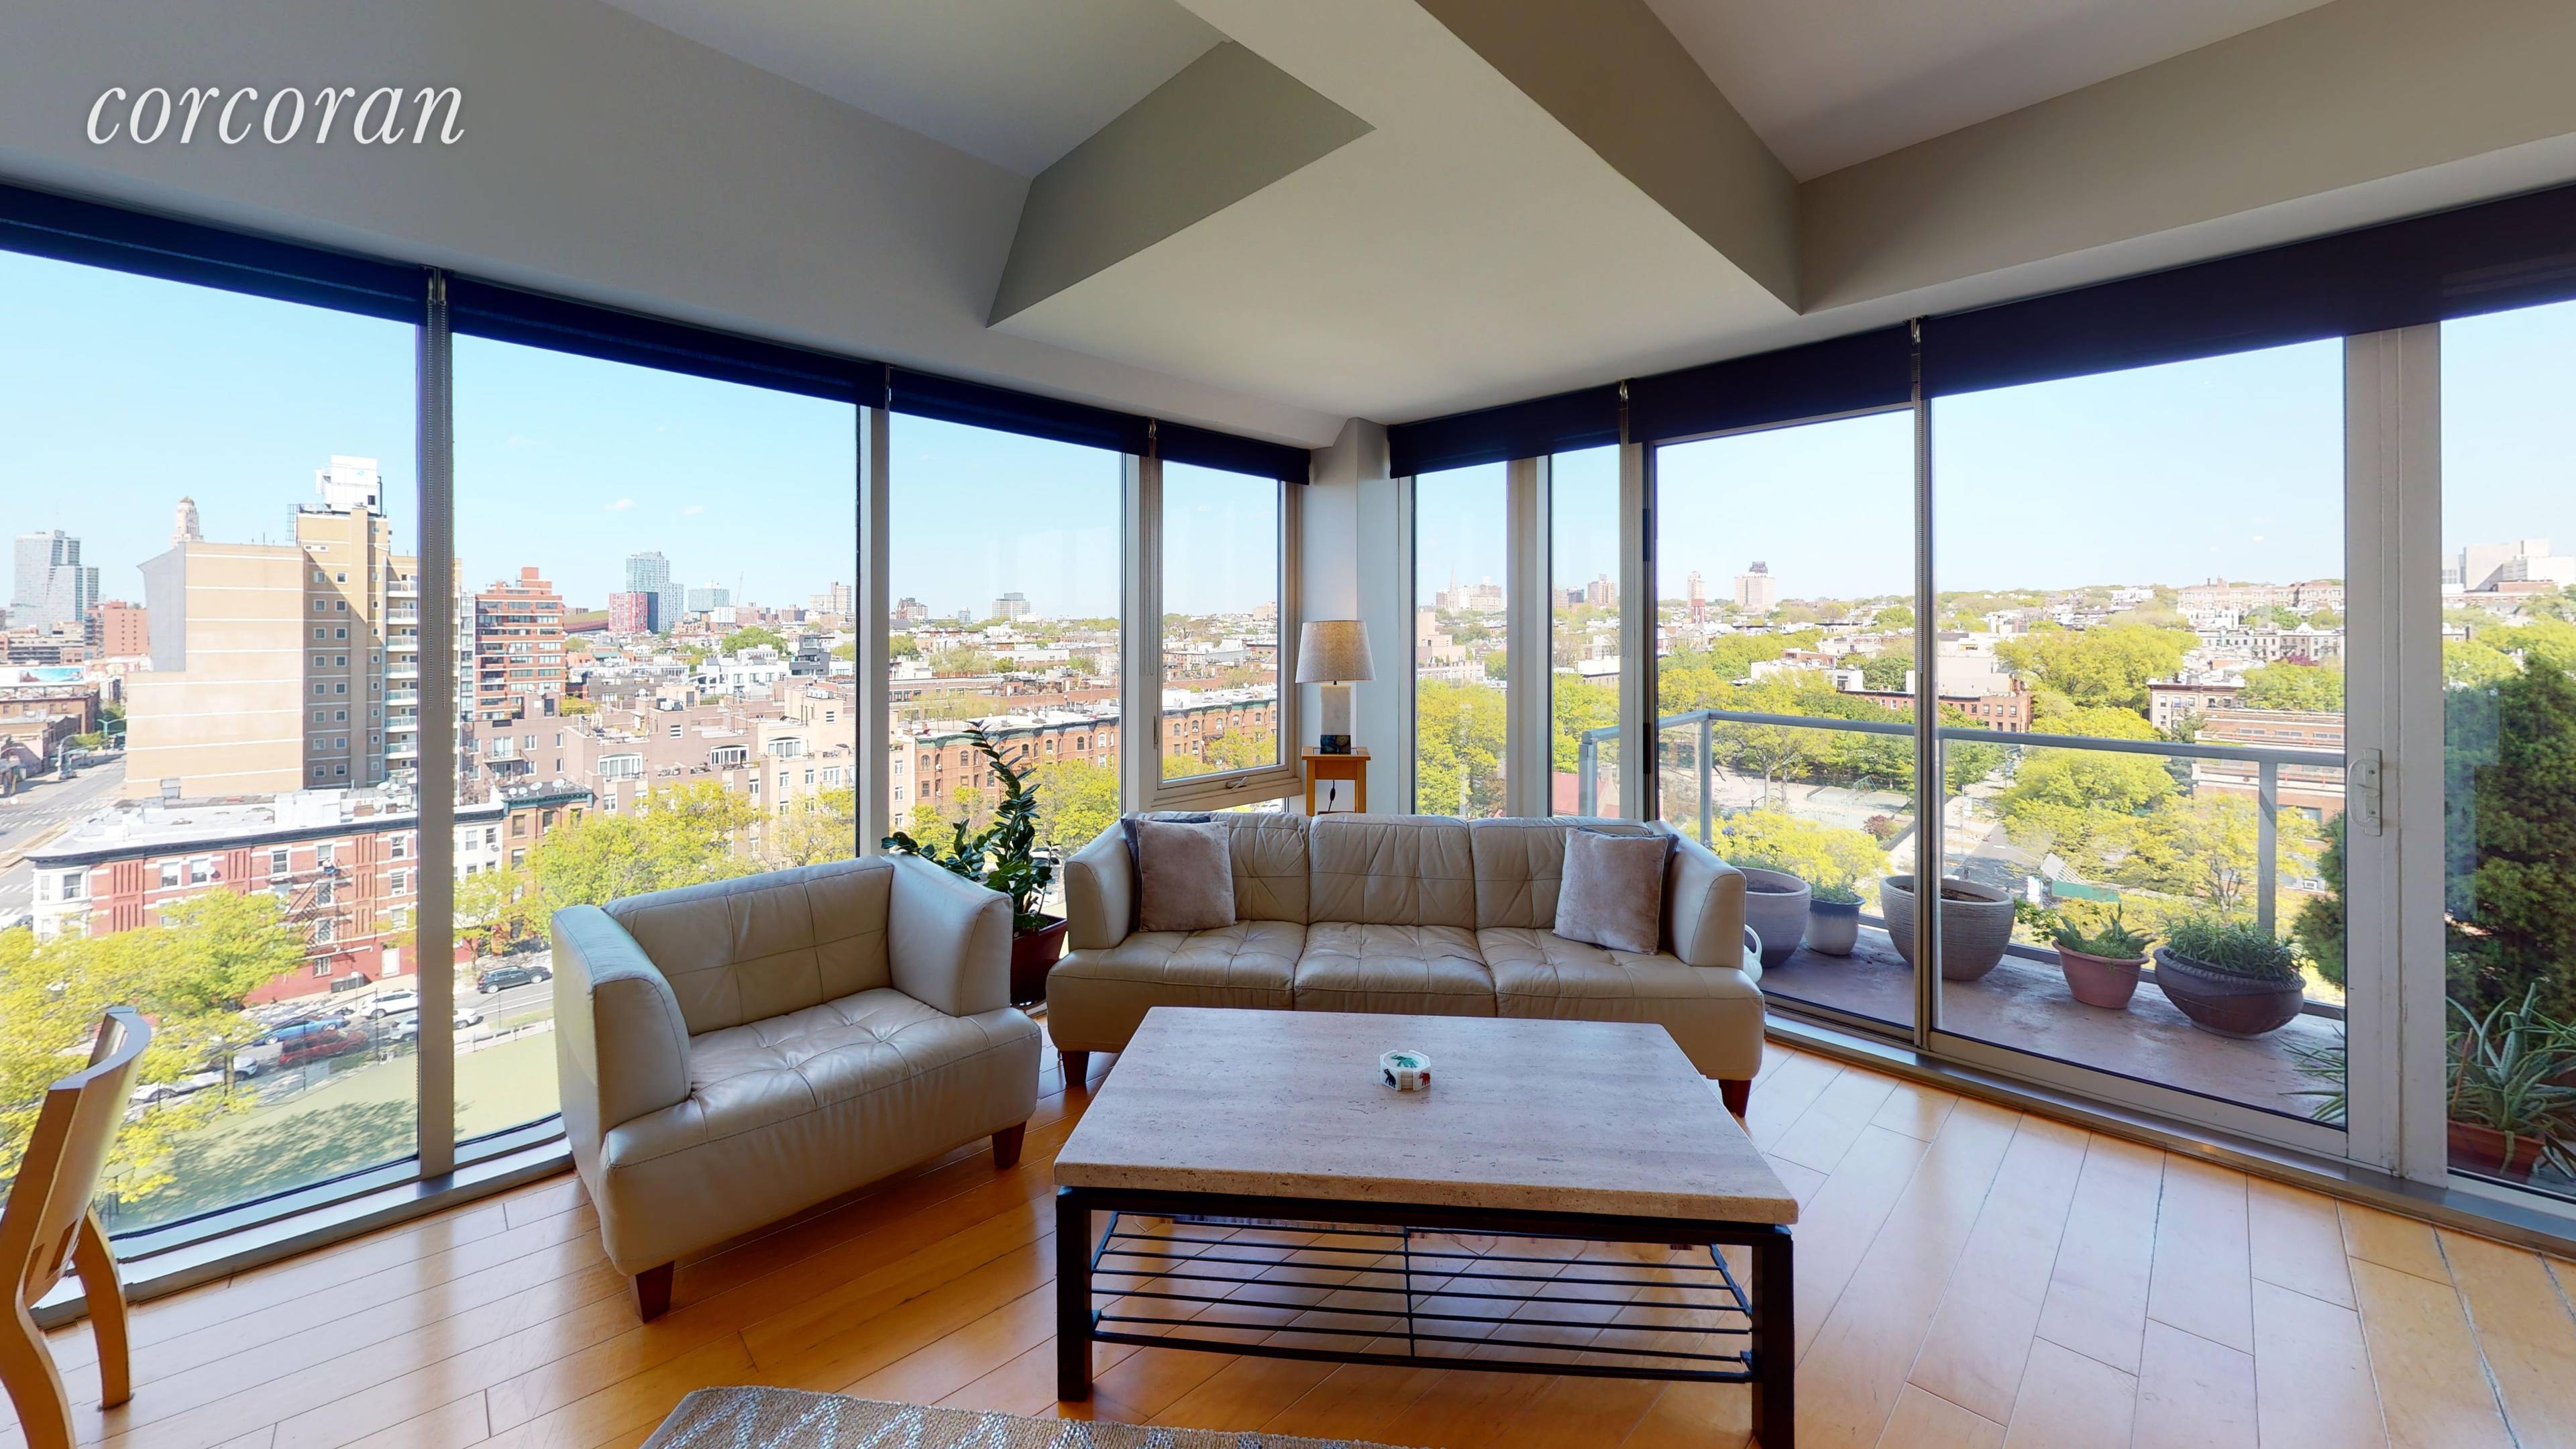 OPEN HOUSE BY APPOINTMENT ONLY 343 4th Avenue 10G, your CASTLE in the SKY in the heart of Park Slope, with stunning views and two private balconies.